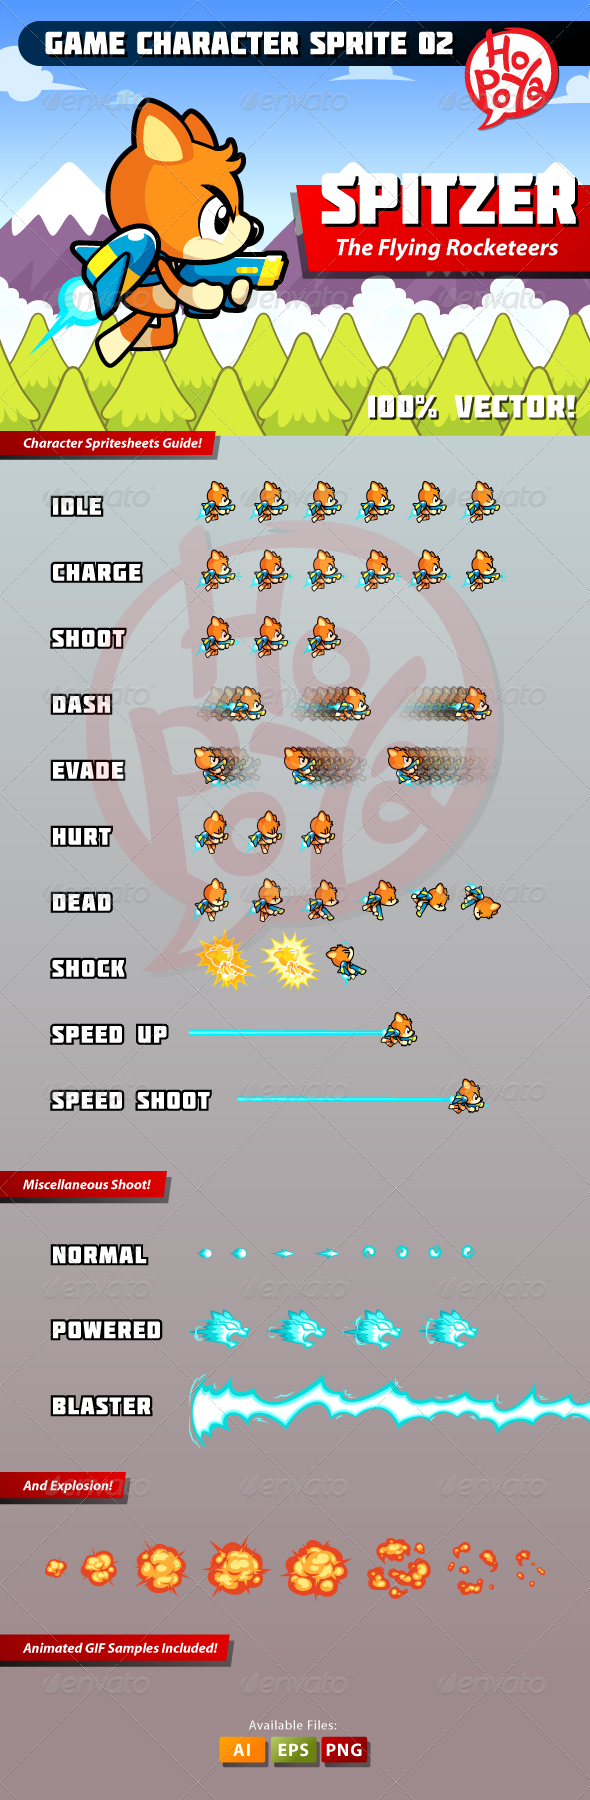 Game Character Sprite 02